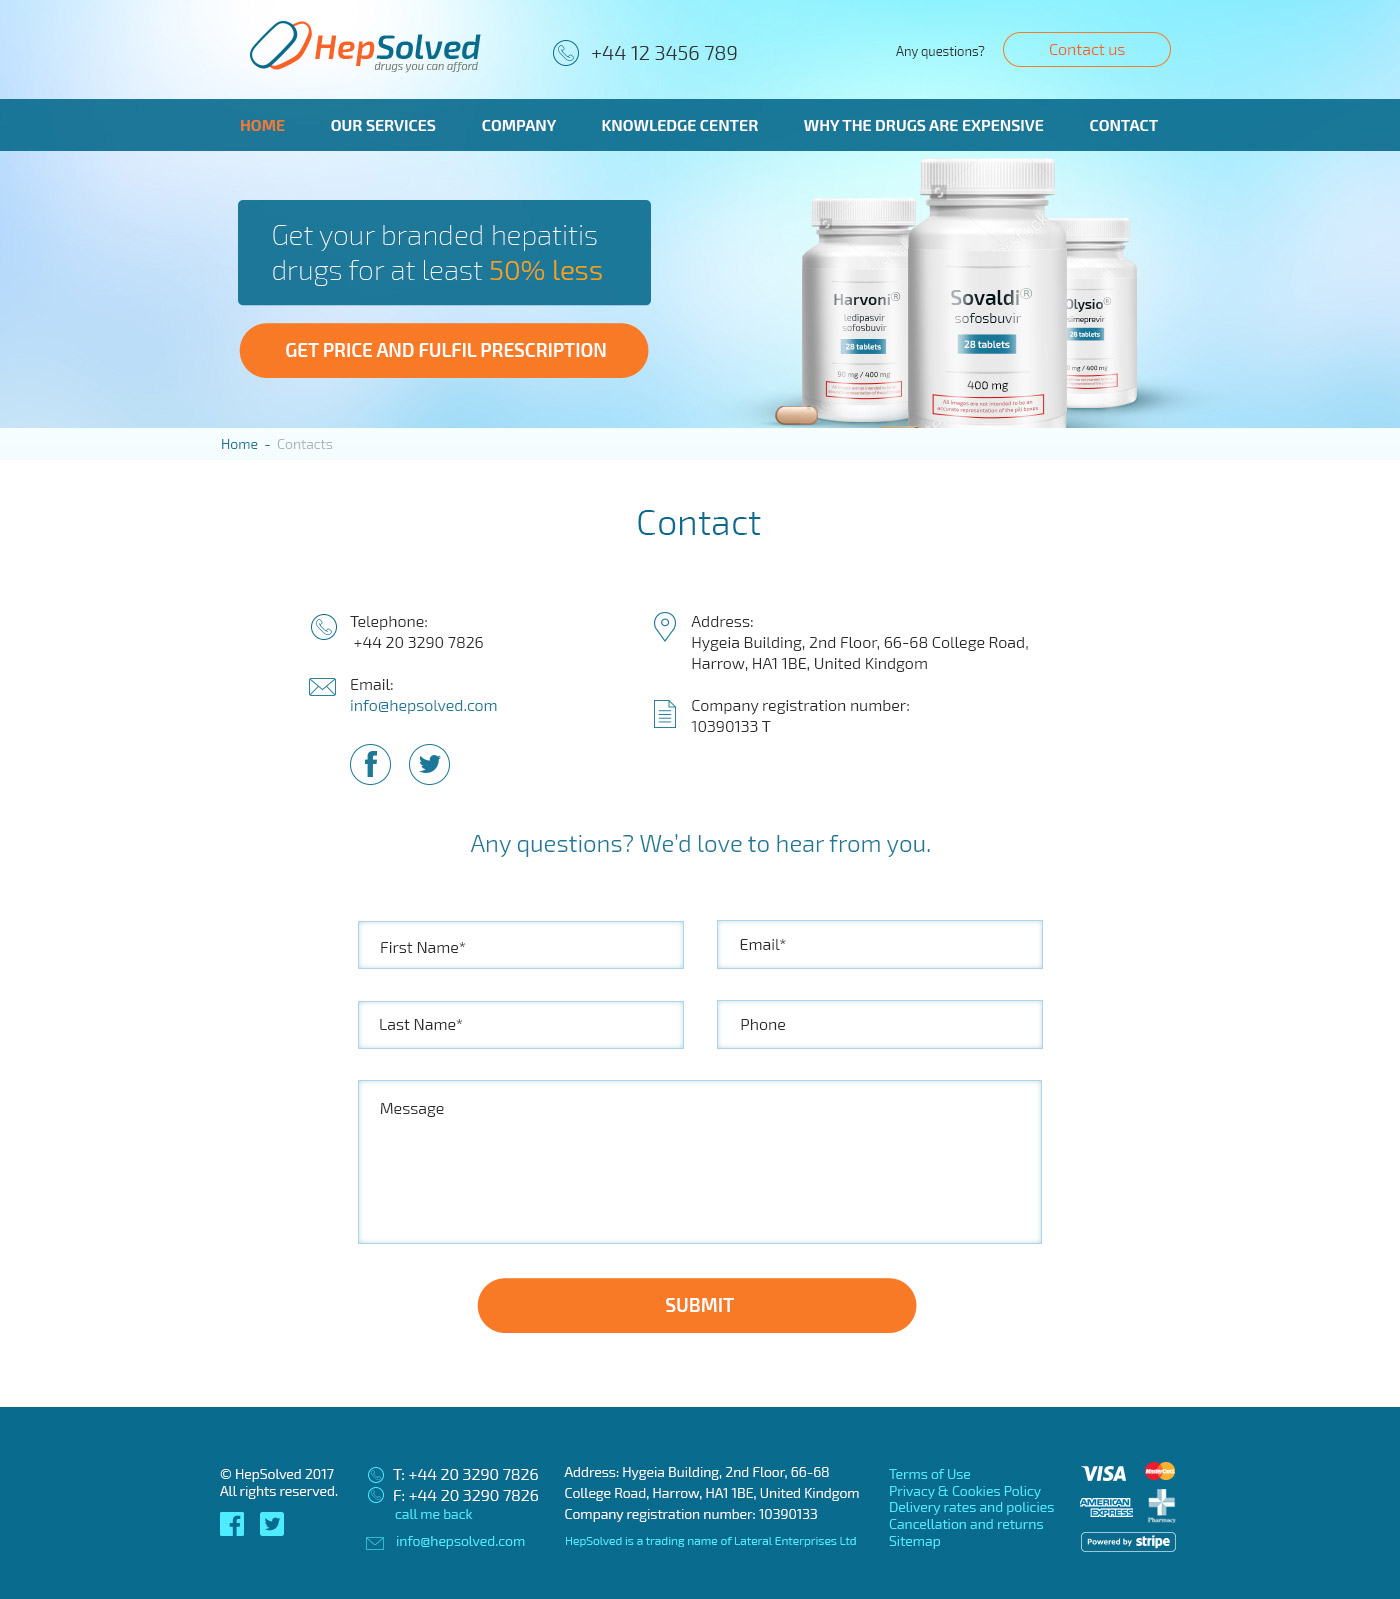 Contact tours page design of HepSolved website